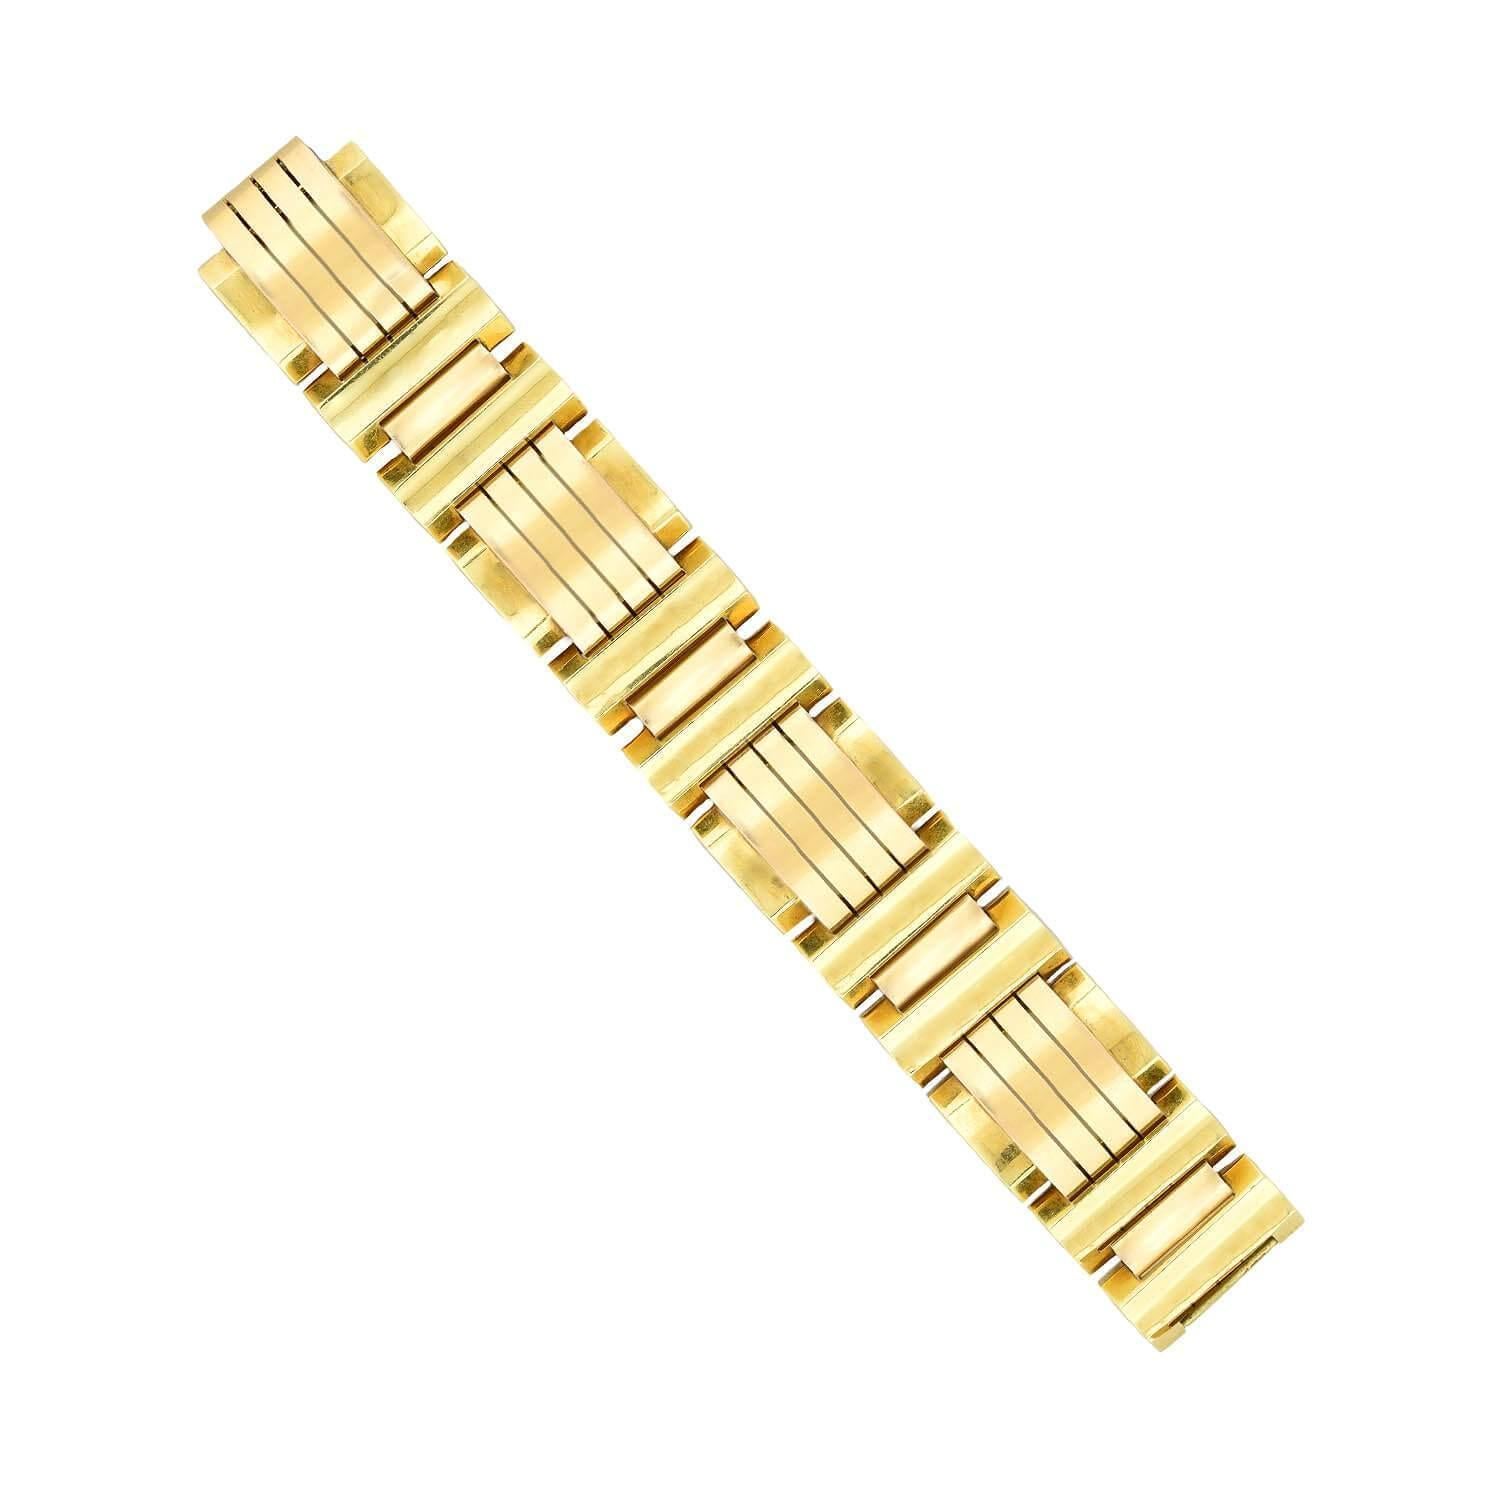 A fabulous bracelet from the Retro (ca1940s) era! Crafted in 18kt gold, this bracelet is comprised of twelve yellow gold links connected by rosy yellow gold bars. The intriguing geometric bar pattern has a wonderful mixed metal appeal and looks